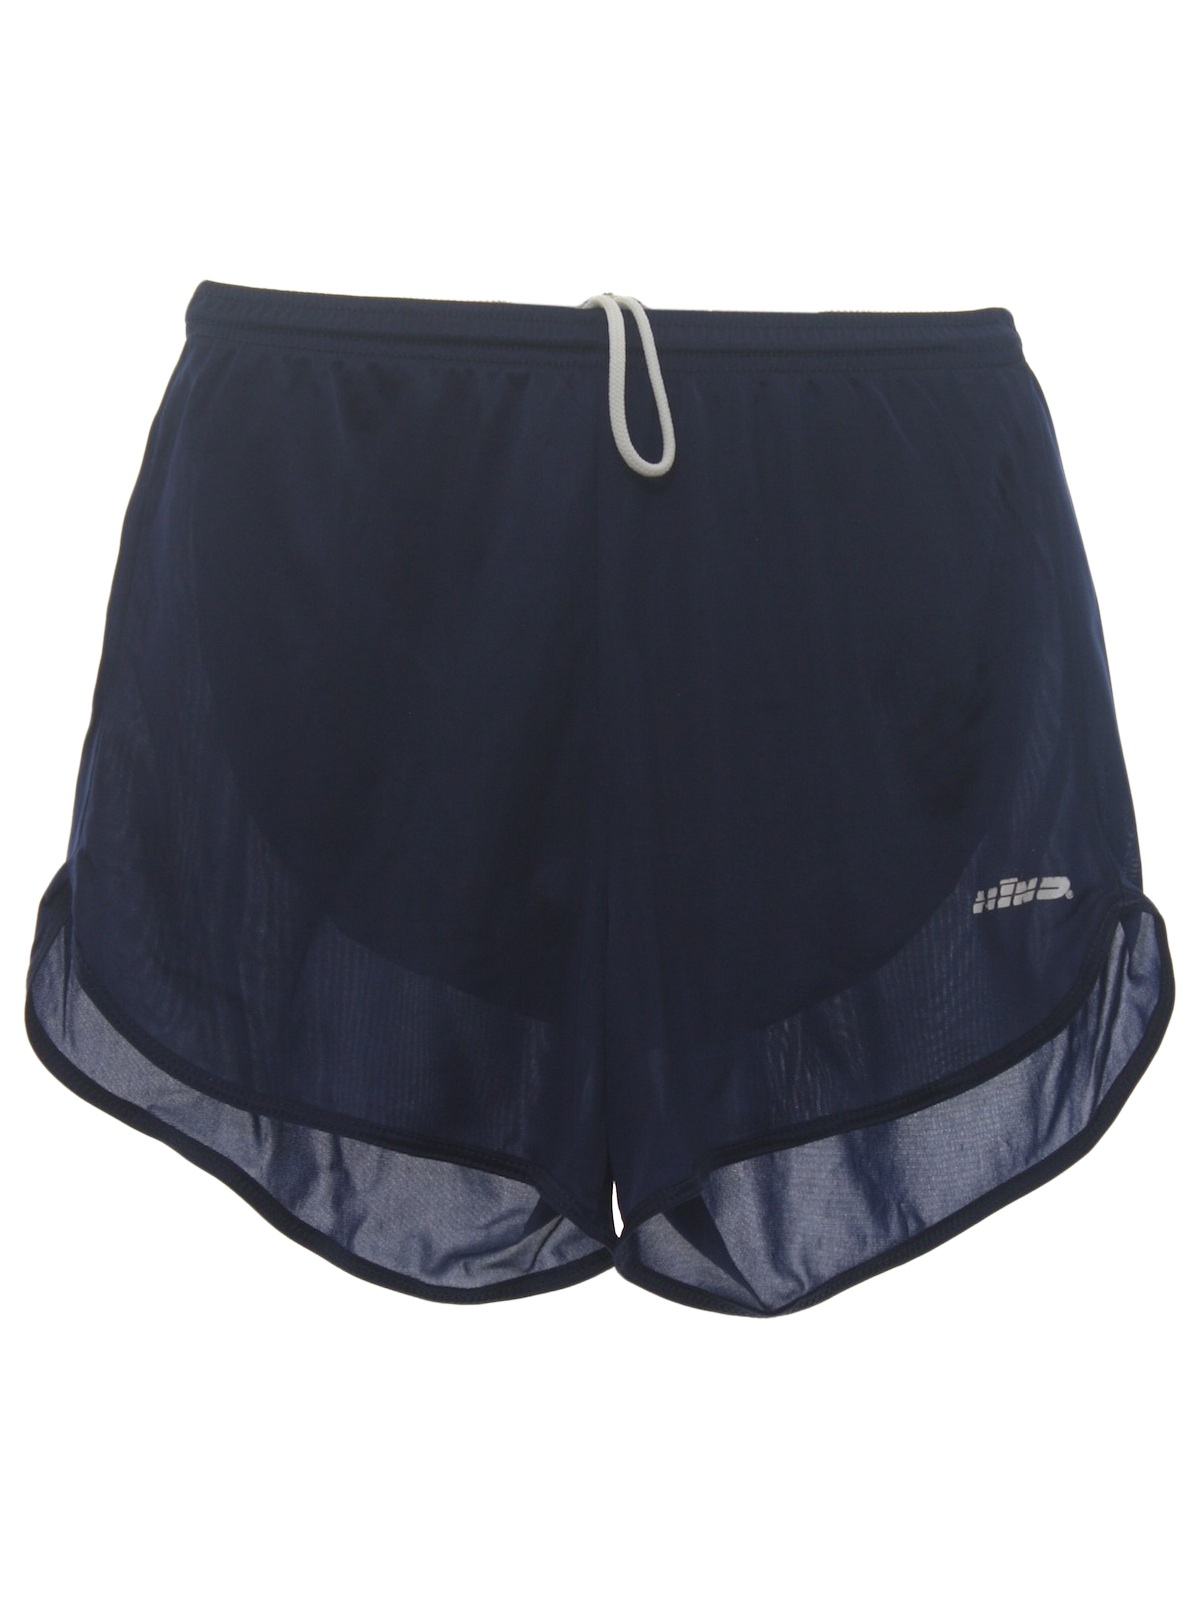 Hind 90's Vintage Shorts: 90s -Hind- Mens midnight blue background ...